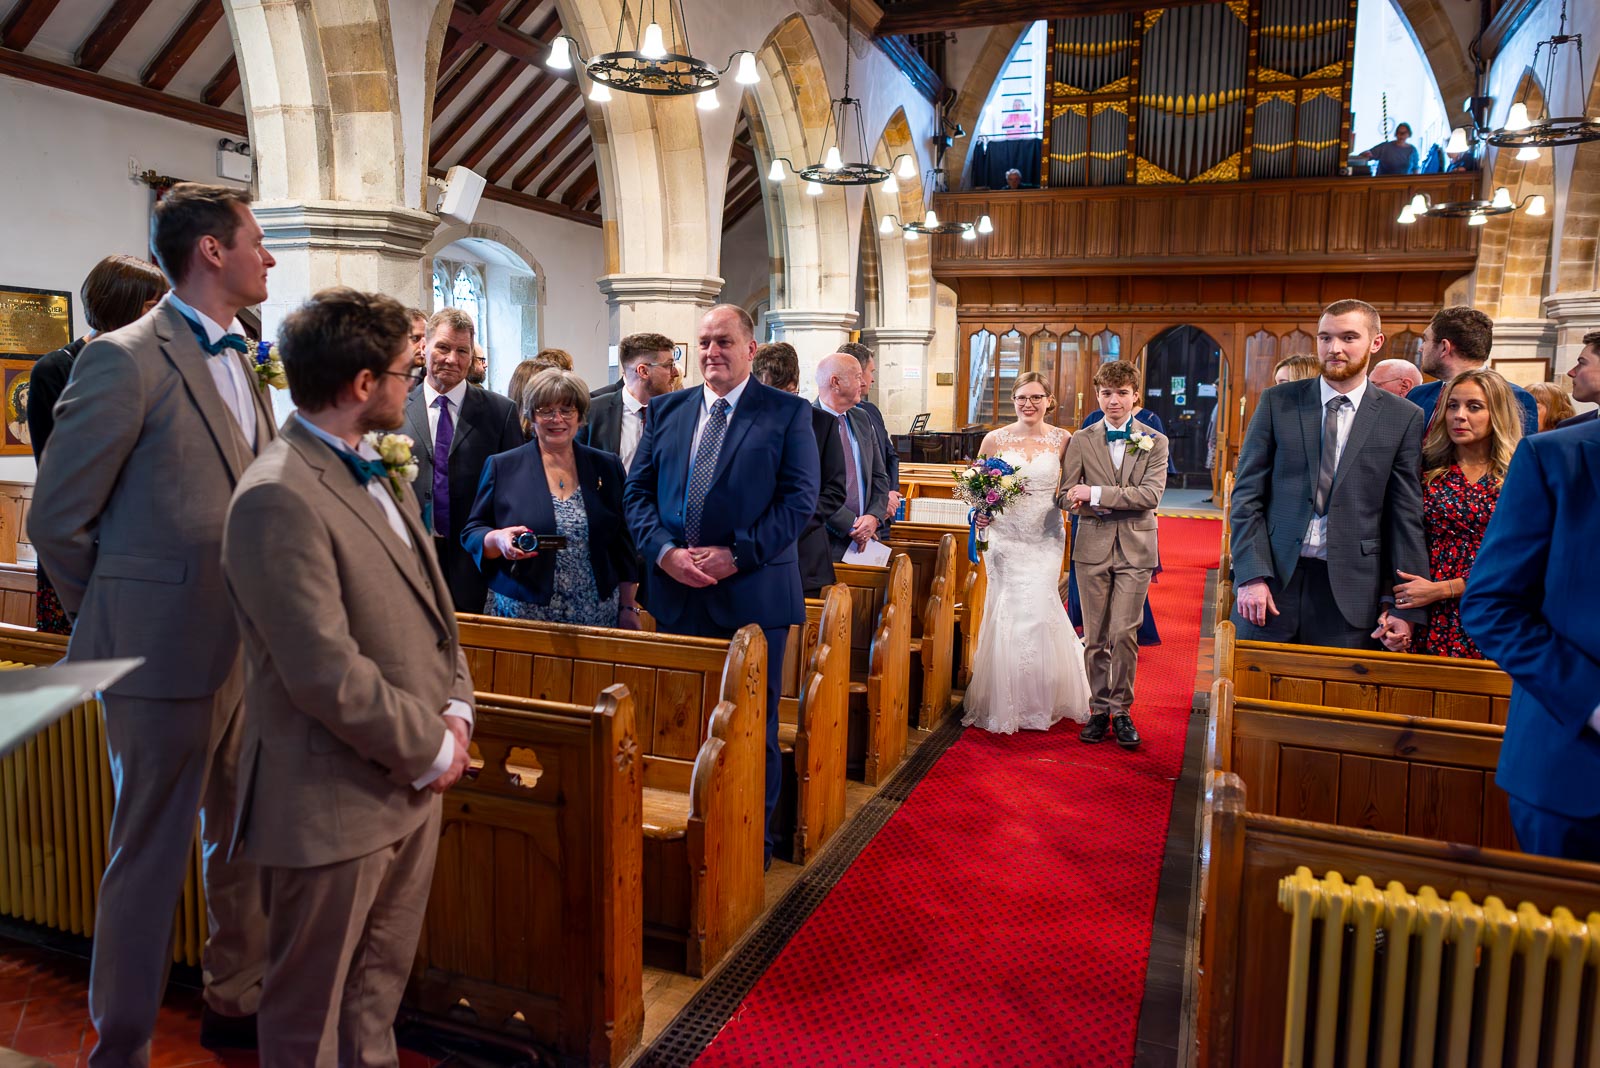 Stephanie is accompanied by her brother down the aisle at The Church of St Peter and St Paul in Hellingly before her wedding to Lewis.